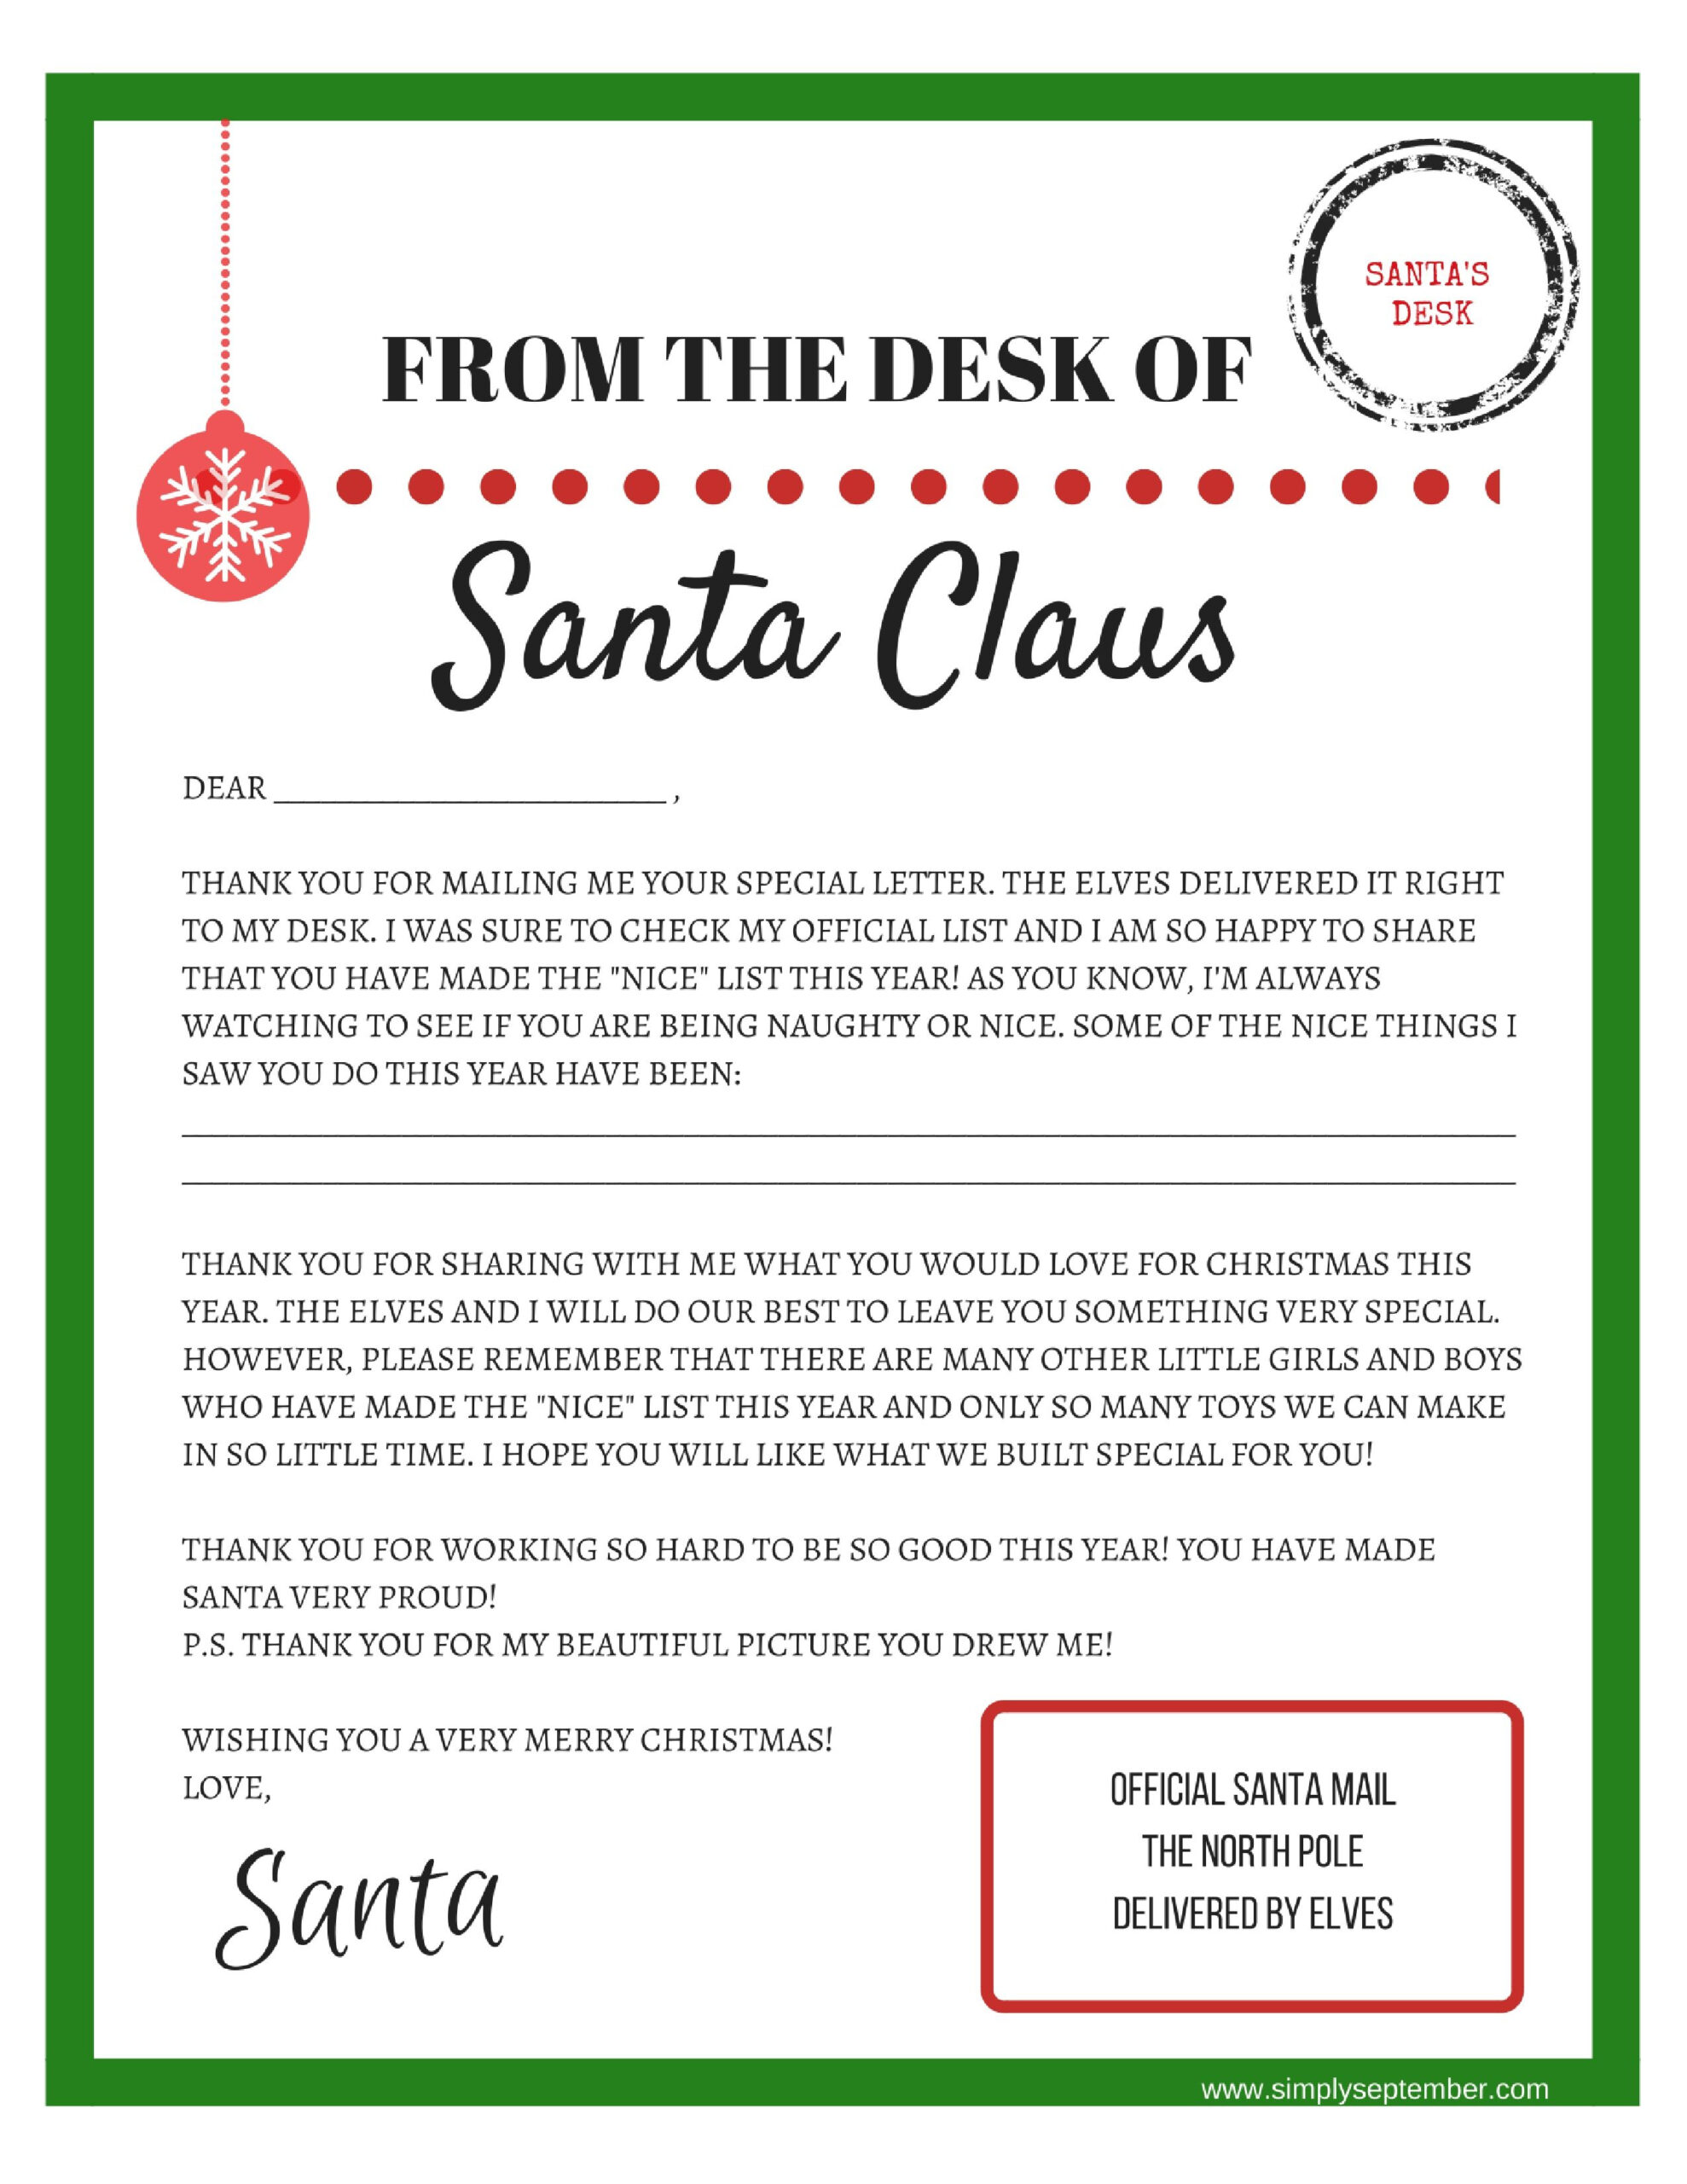 Letters To And From Santa: Free Printables - Simply September with regard to Free Personalized Printable Letters From Santa Claus